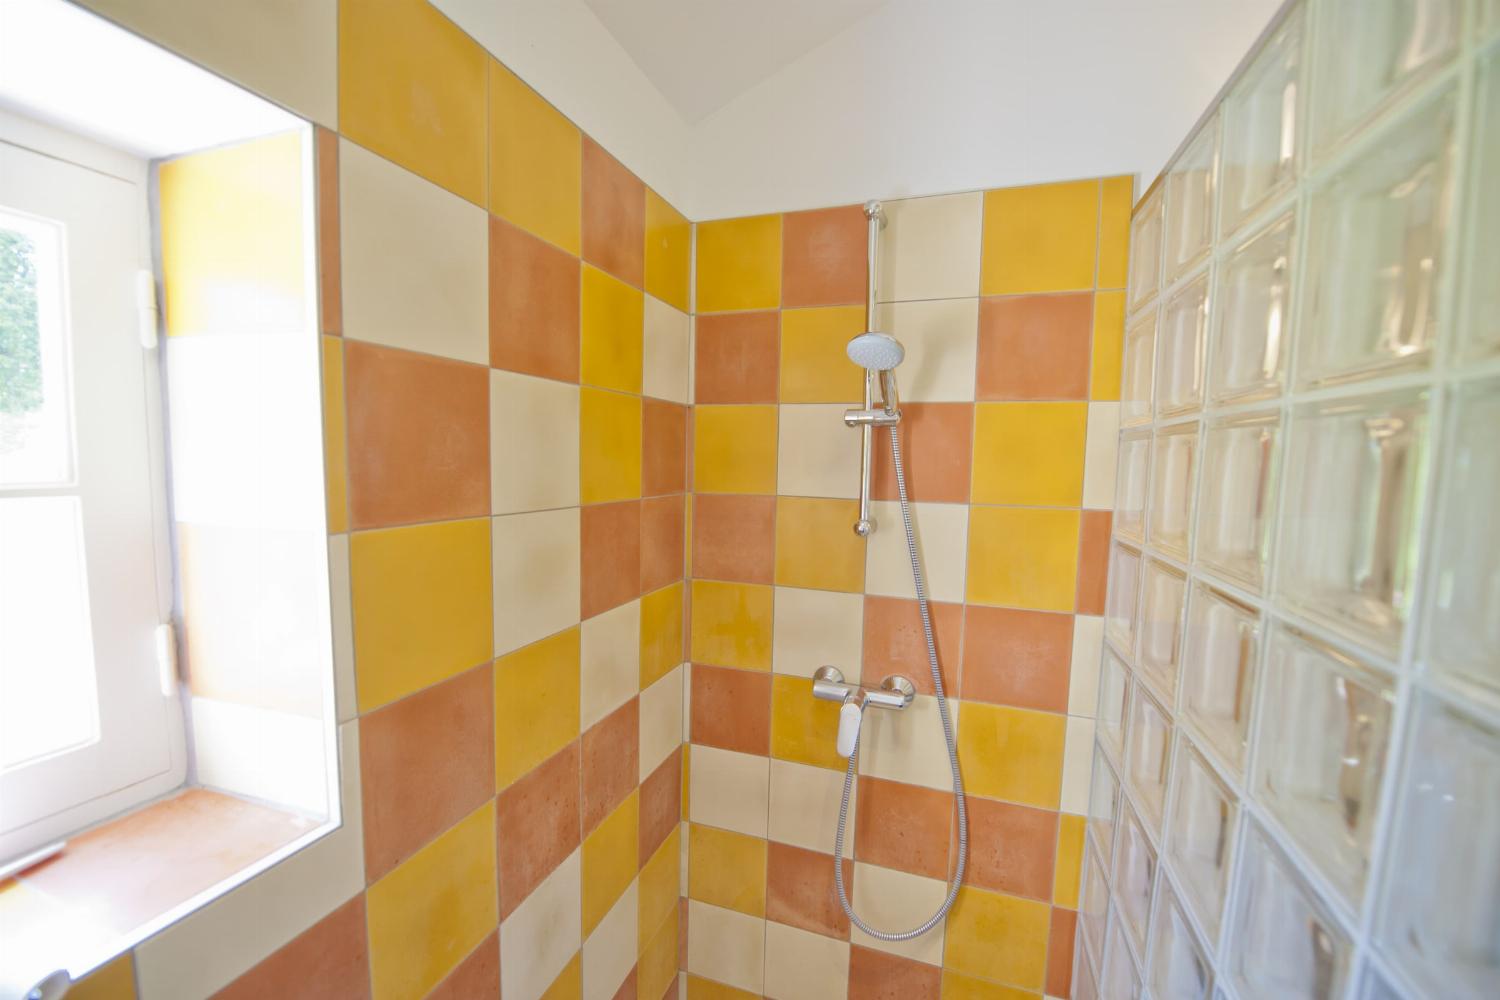 Bathroom | Rental accommodation in Nouvelle-Aquitaine